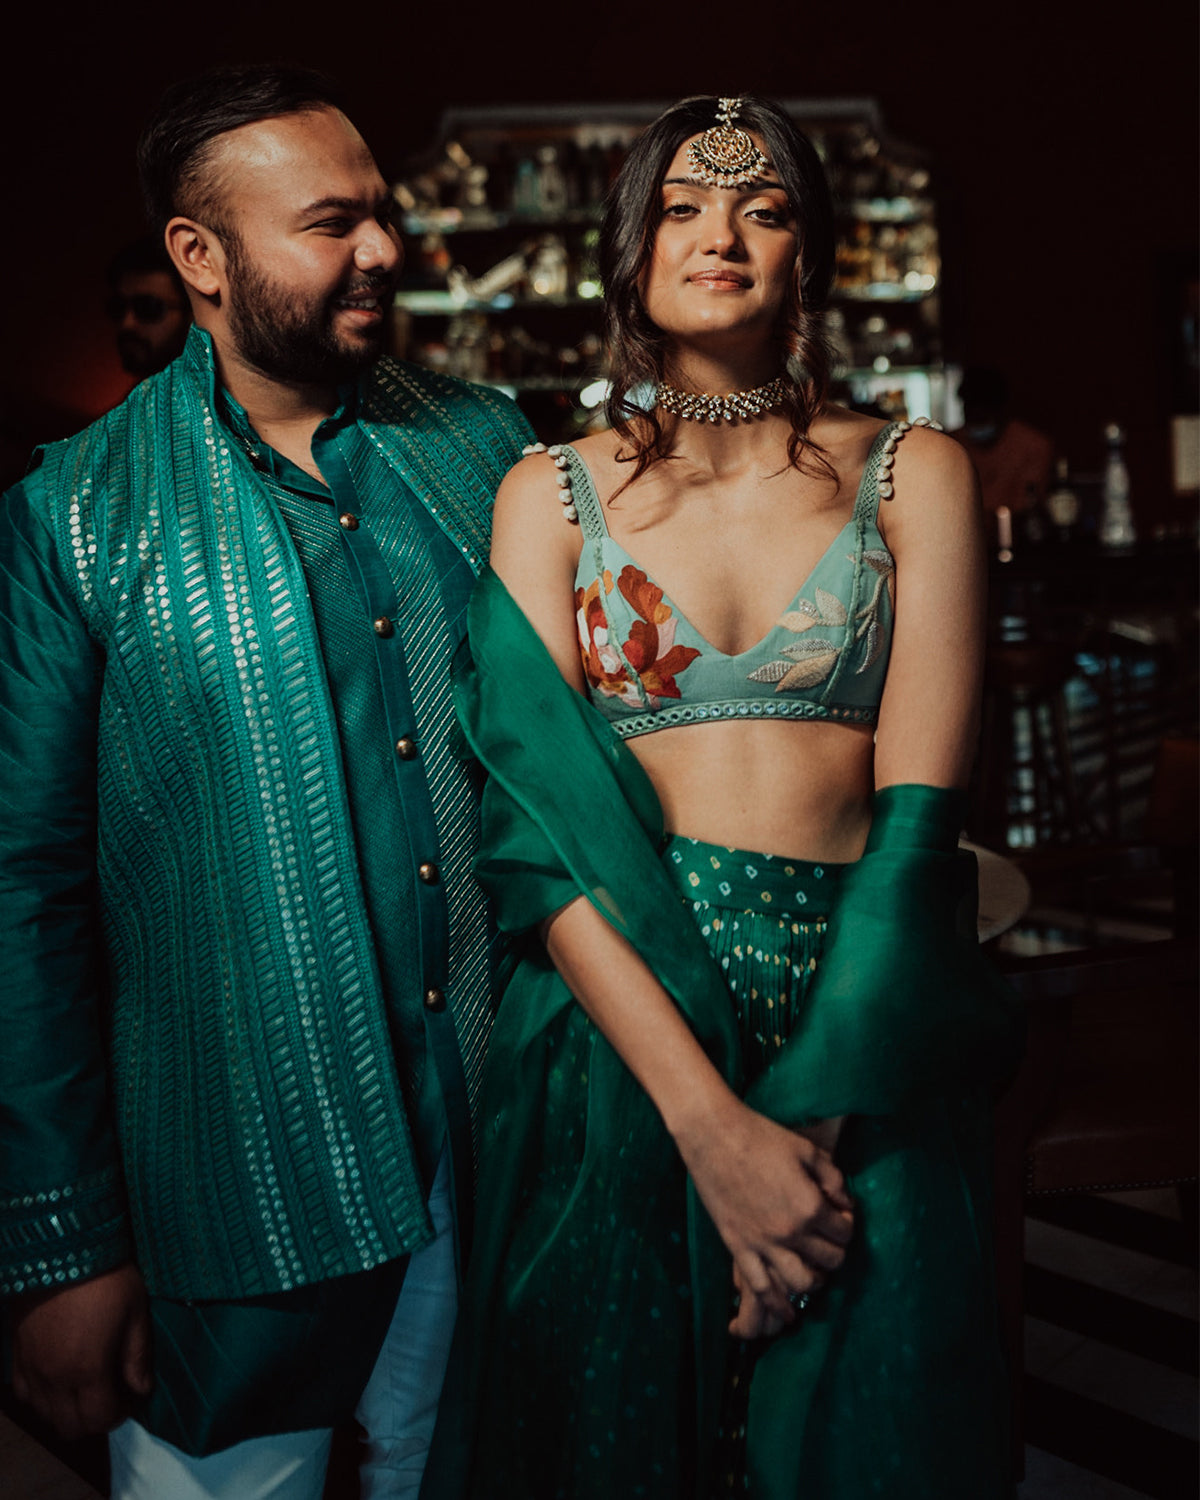 Mint Bandhani Bustier Lehenga by The Little Black Bow